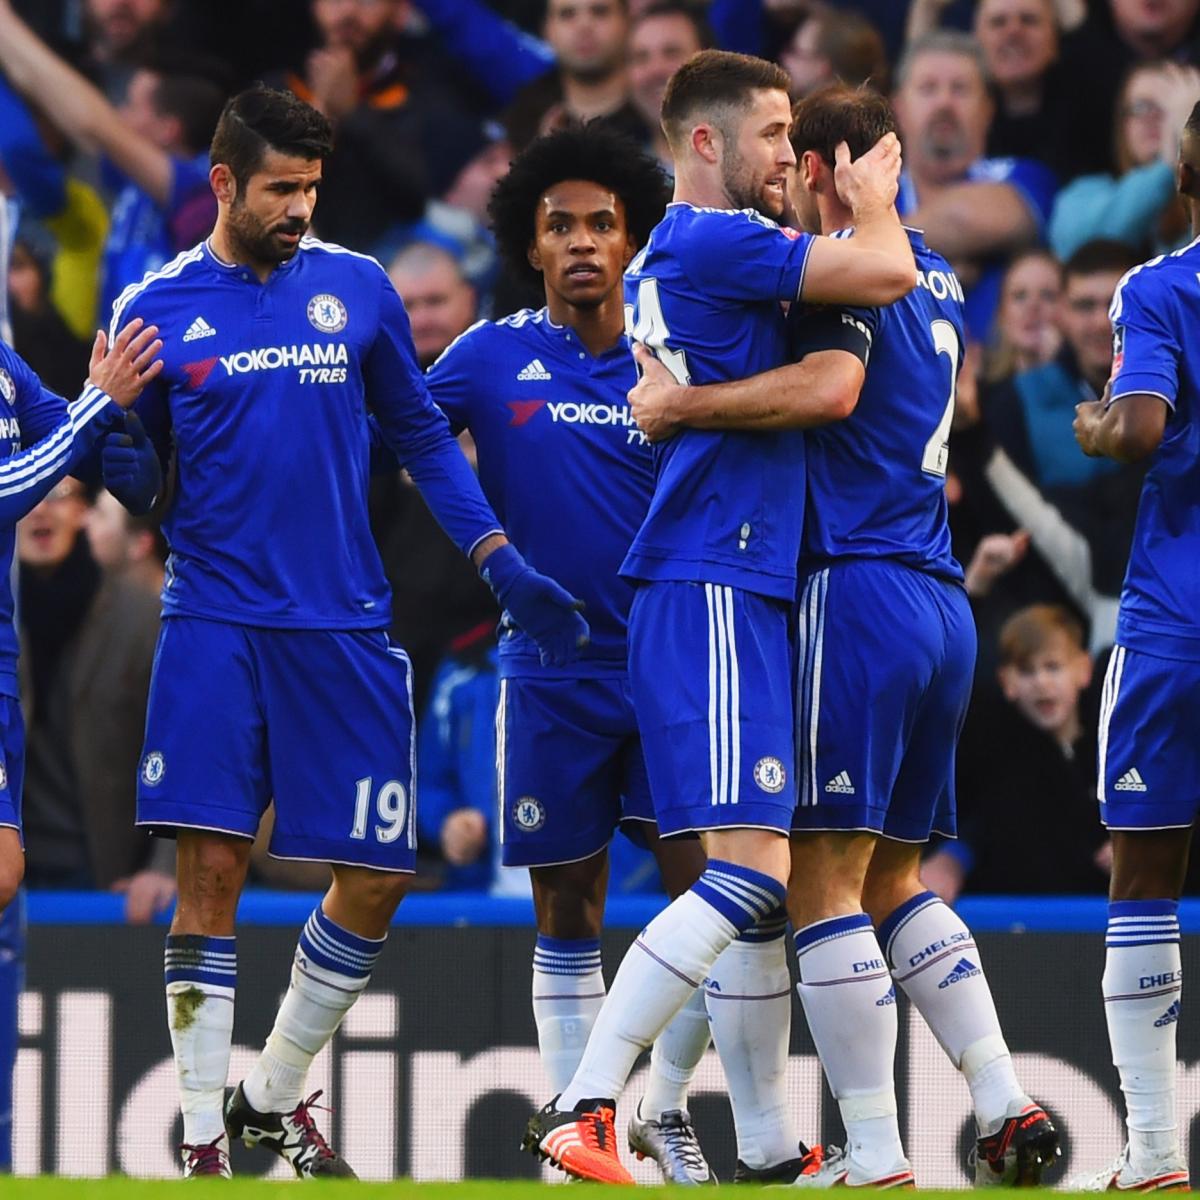 Chelsea vs. Scunthorpe Score, Reaction from 2016 FA Cup 3rdRound